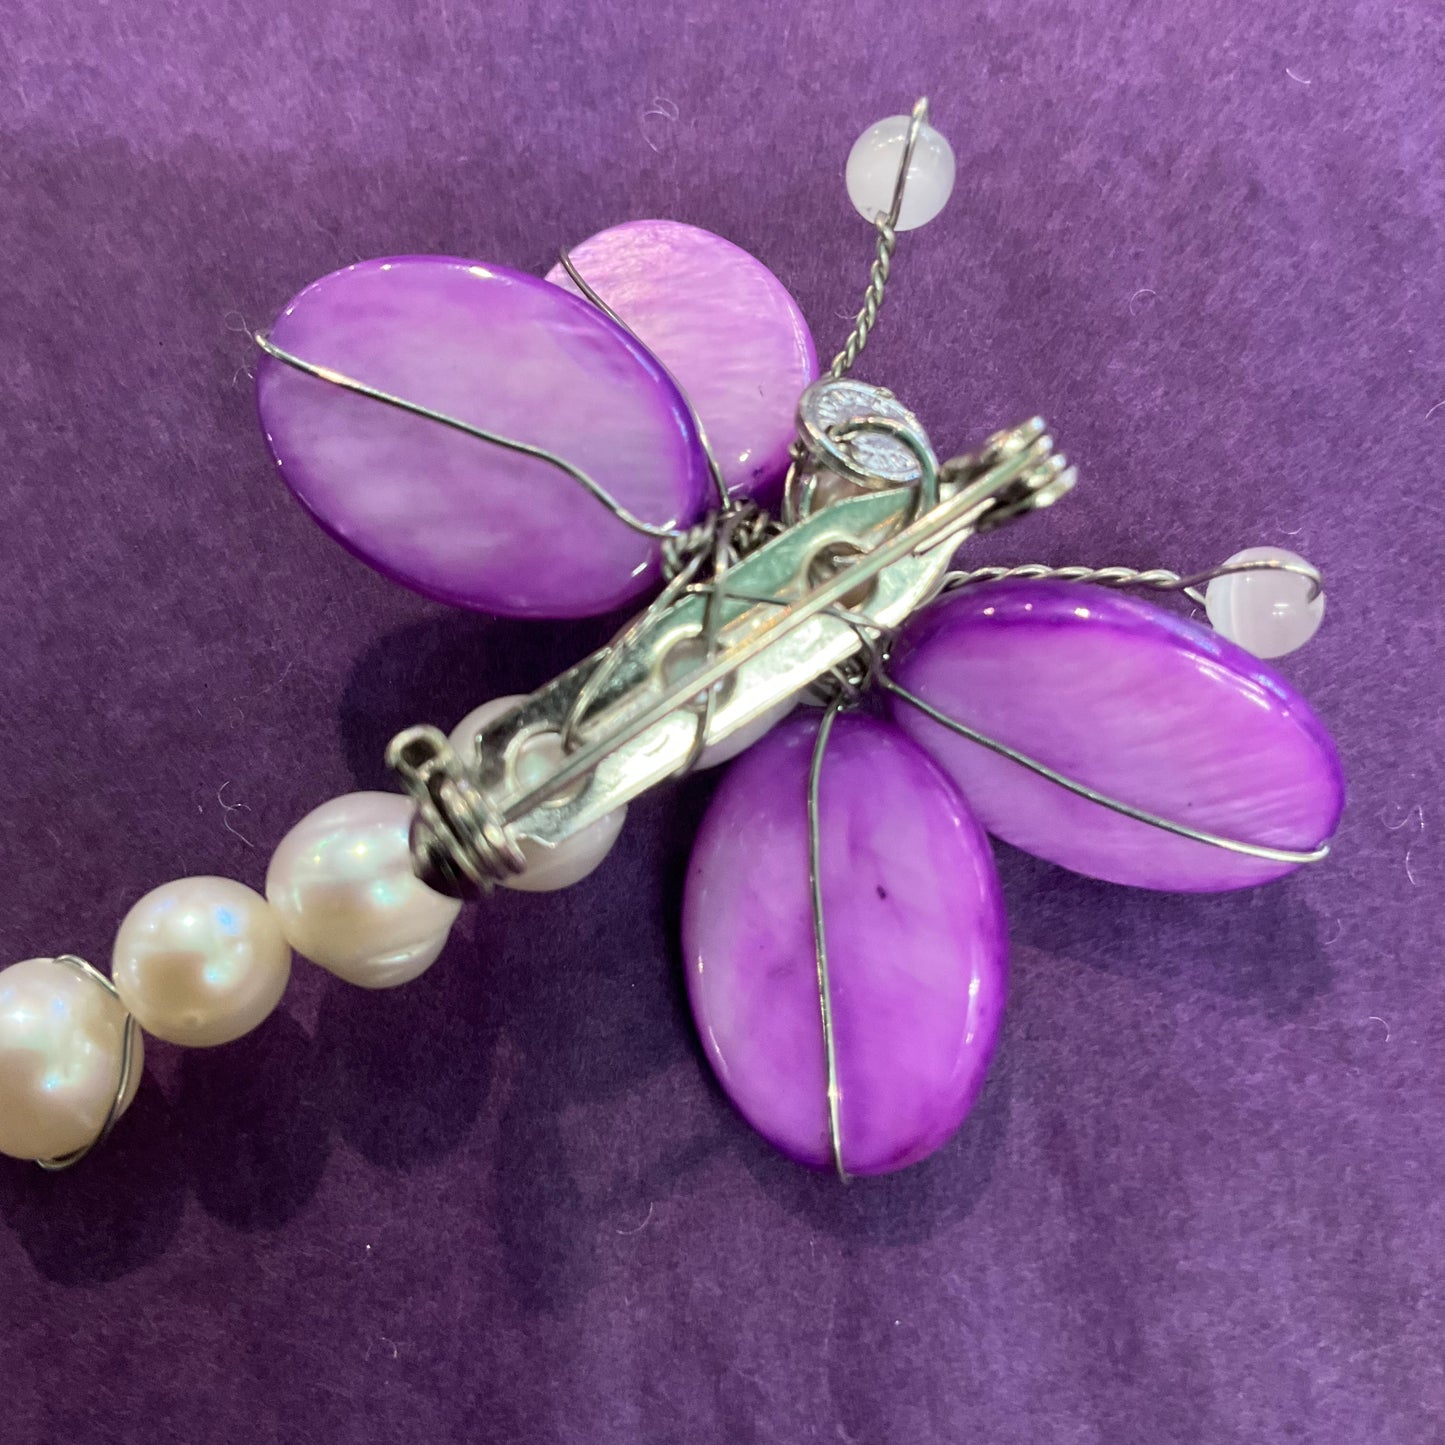 Vintage Butler and Wilson fresh water Pearl and purple polished gemstone butterfly pin/brooch. Signed, as new, gift for her, festival, wedding.